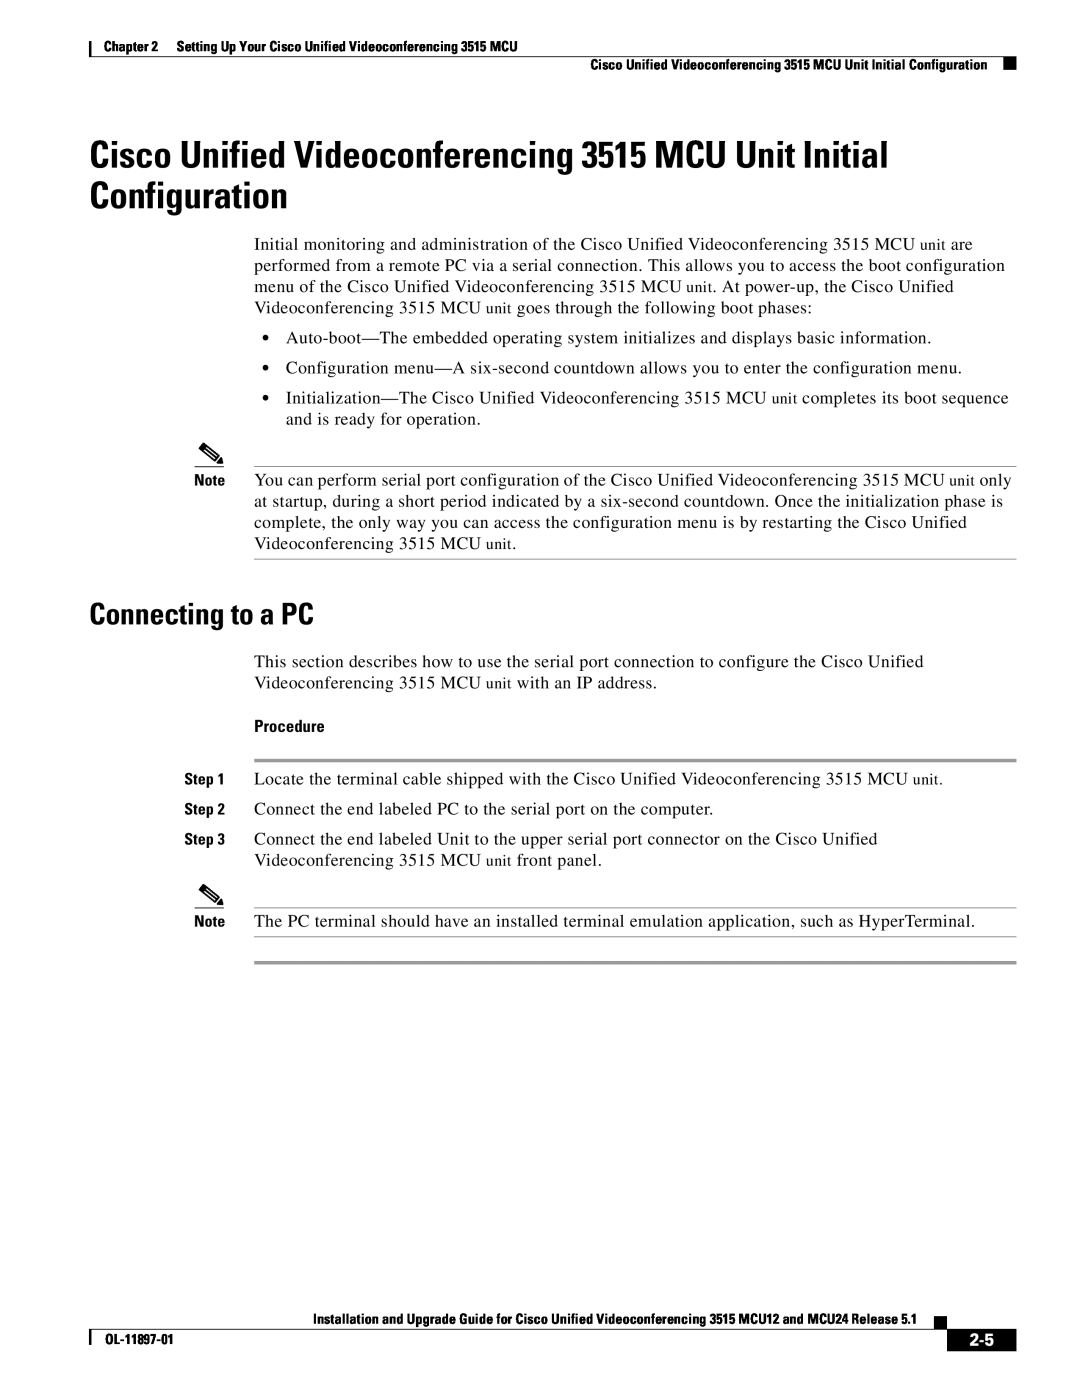 Cisco Systems MCU24 manual Cisco Unified Videoconferencing 3515 MCU Unit Initial Configuration, Connecting to a PC 